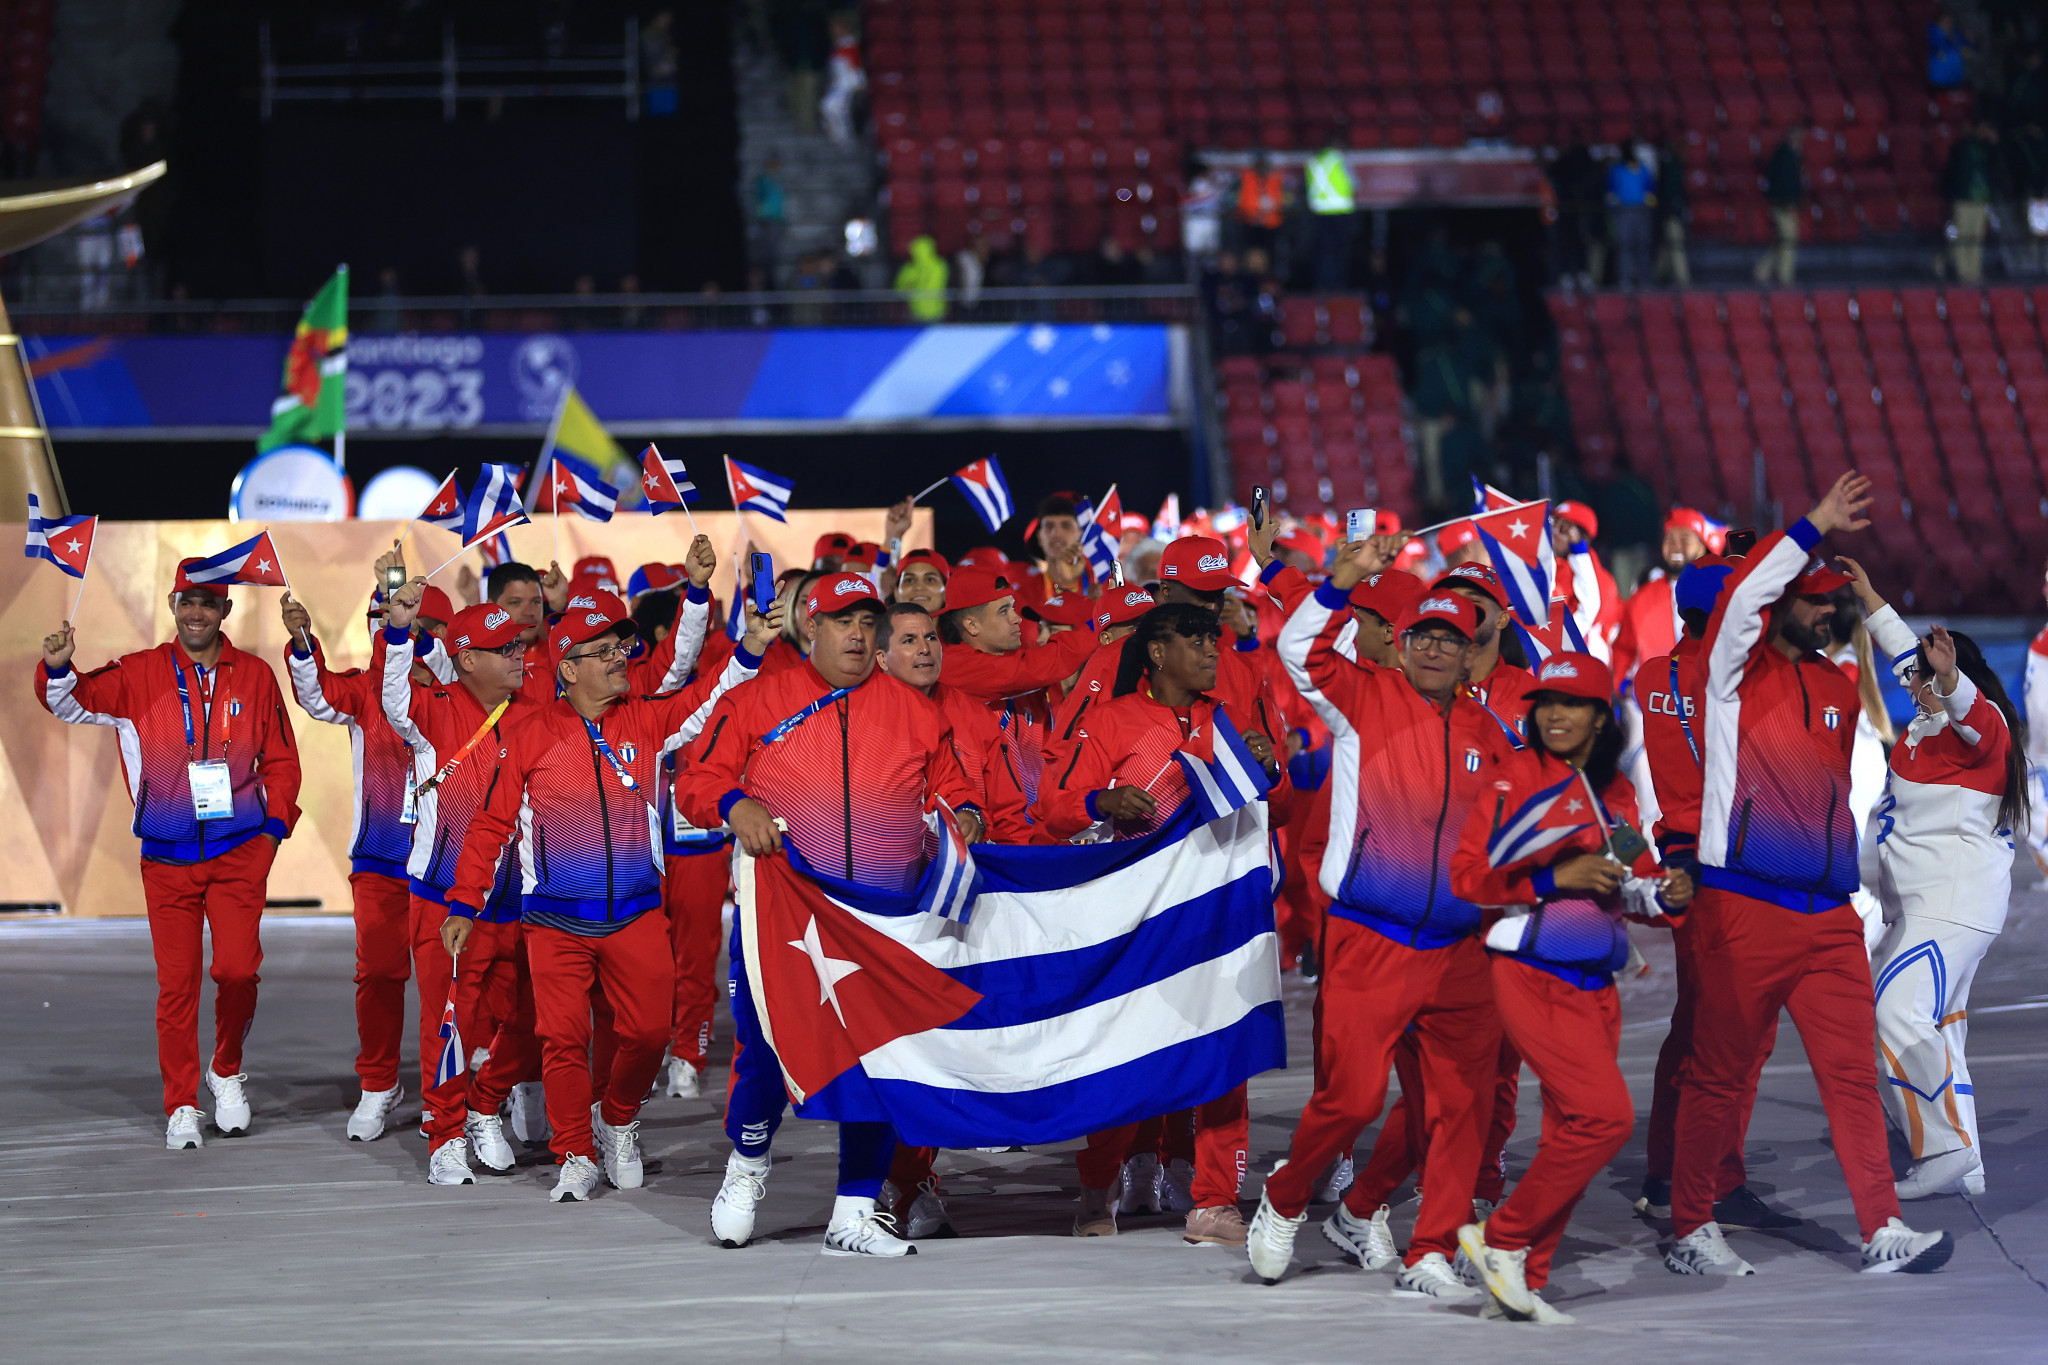 Cuba aspires to be in the top 20 of the medals table with "no less than five gold medals". GETTY IMAGES